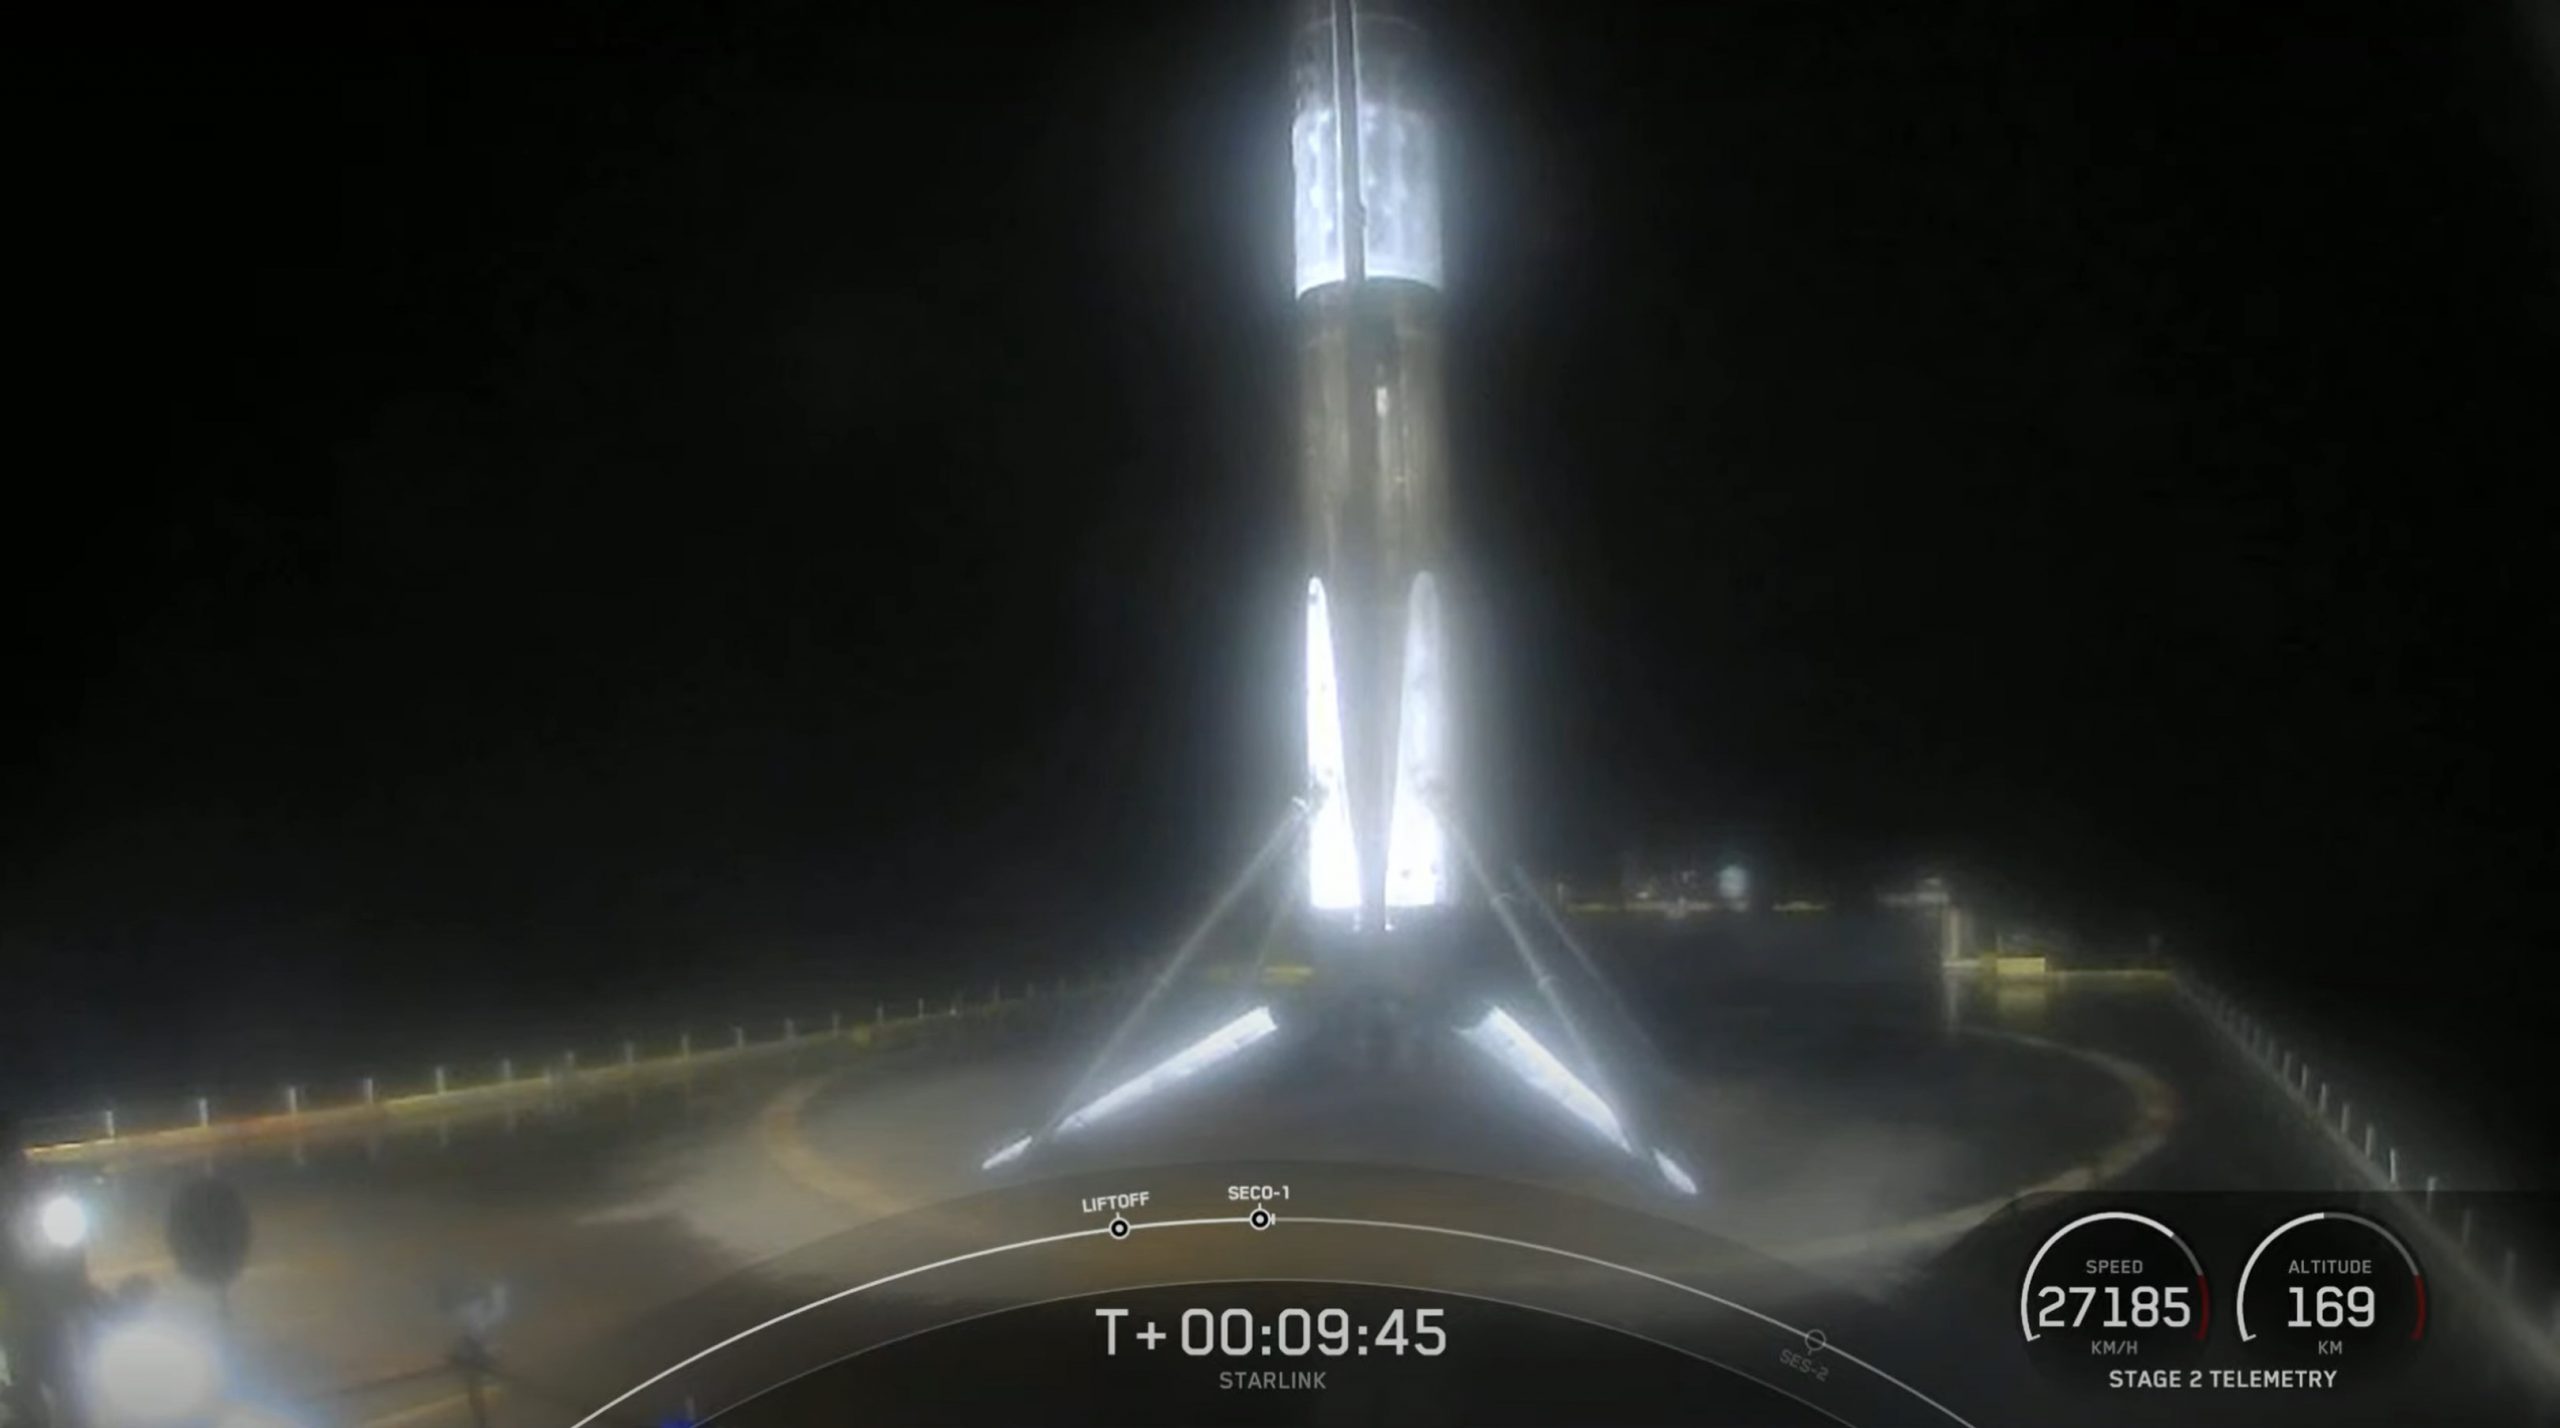 Starlink-22 Falcon 9 B1060 LC-40 032421 webcast (SpaceX) 7